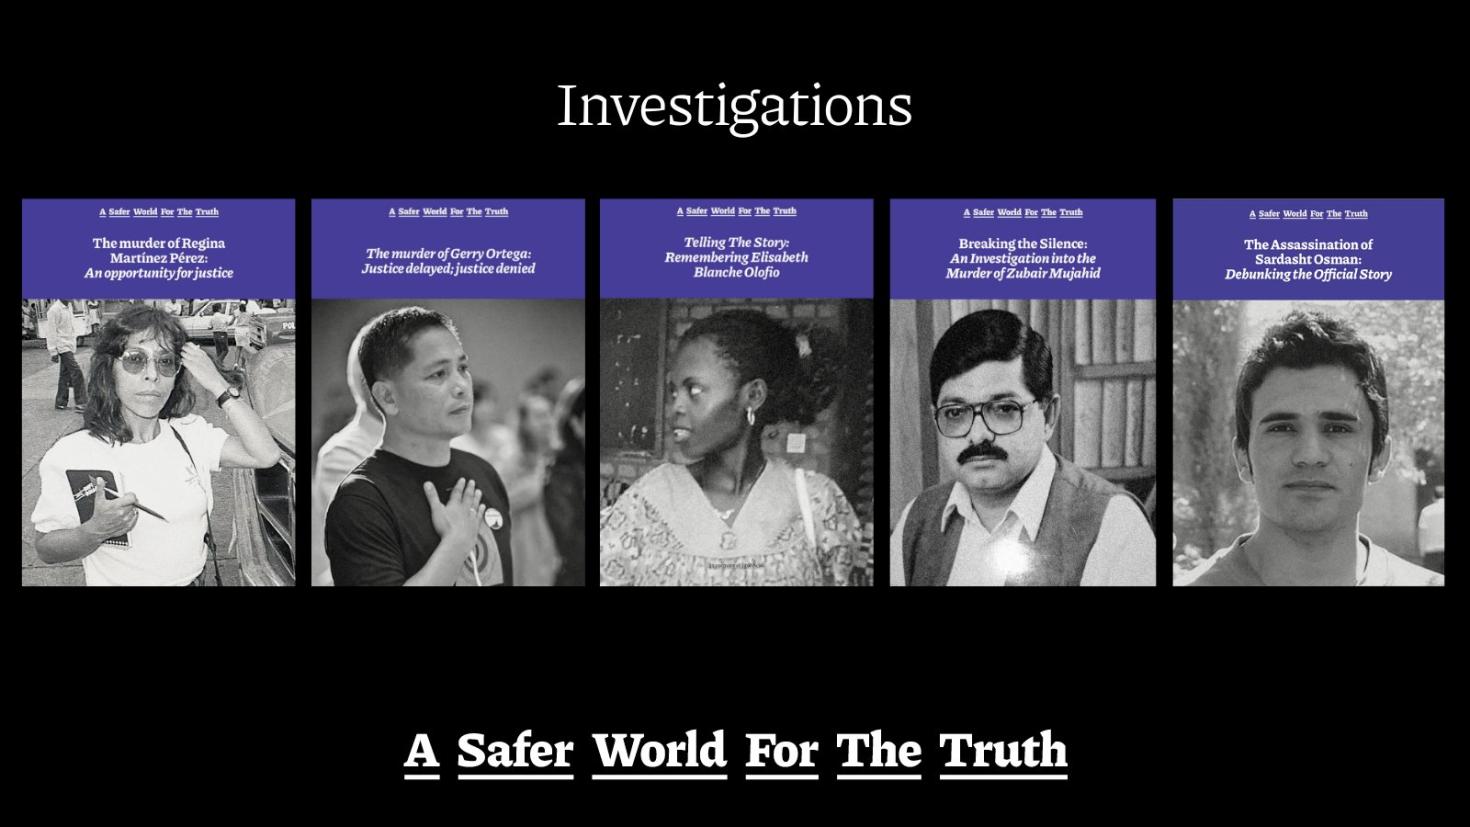 The Investigations